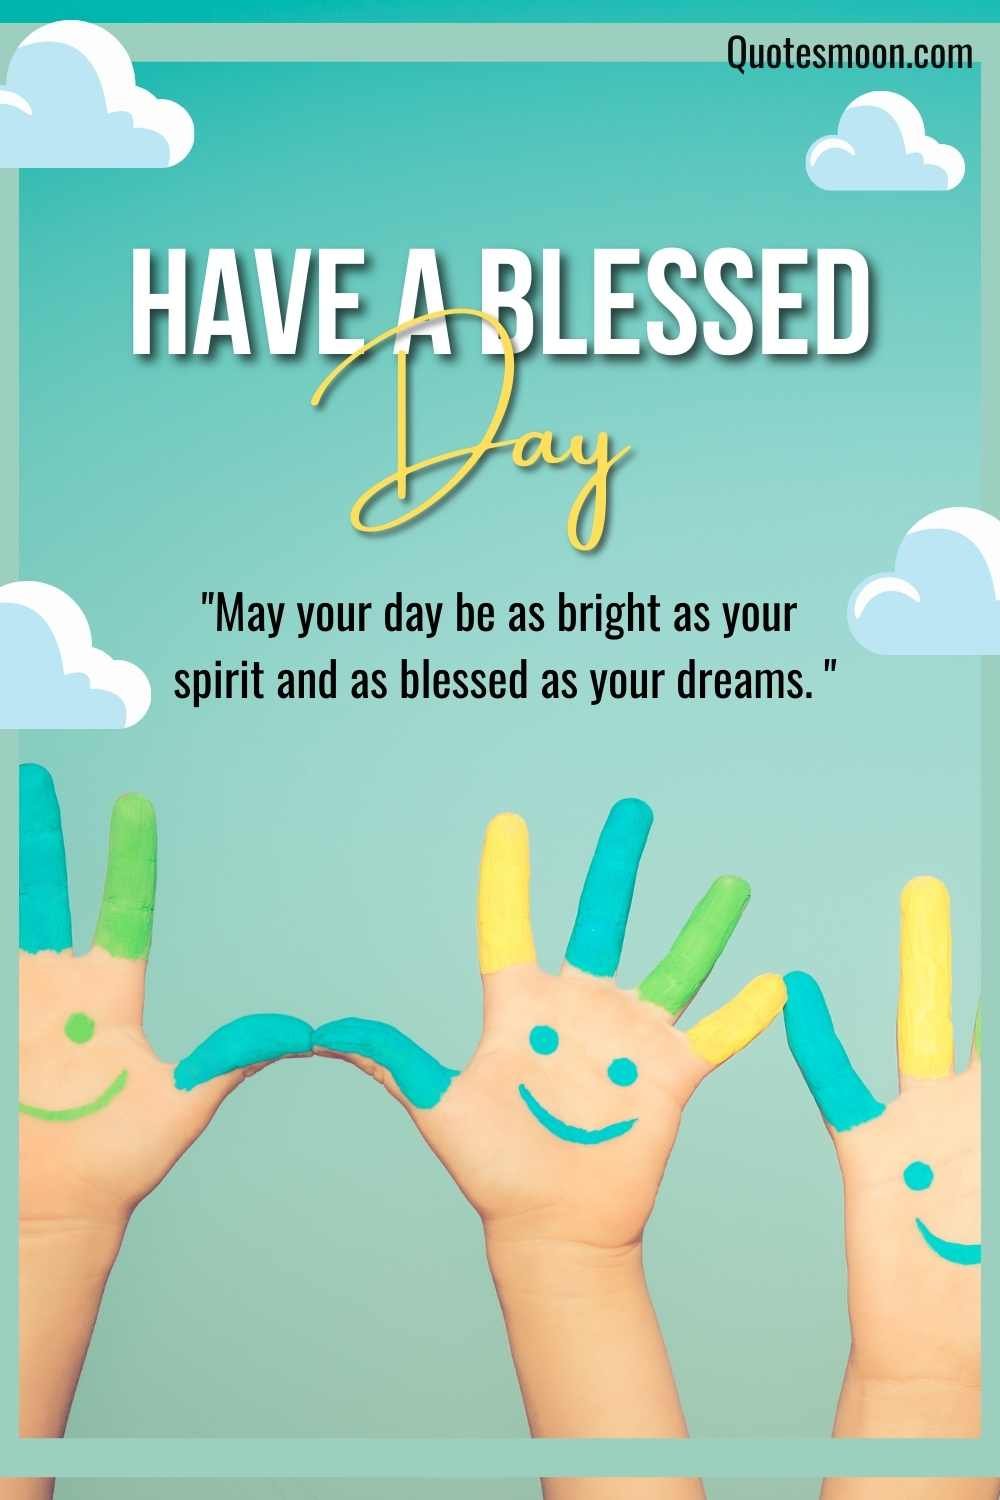 May You Have a Blessed Day Quotes with images